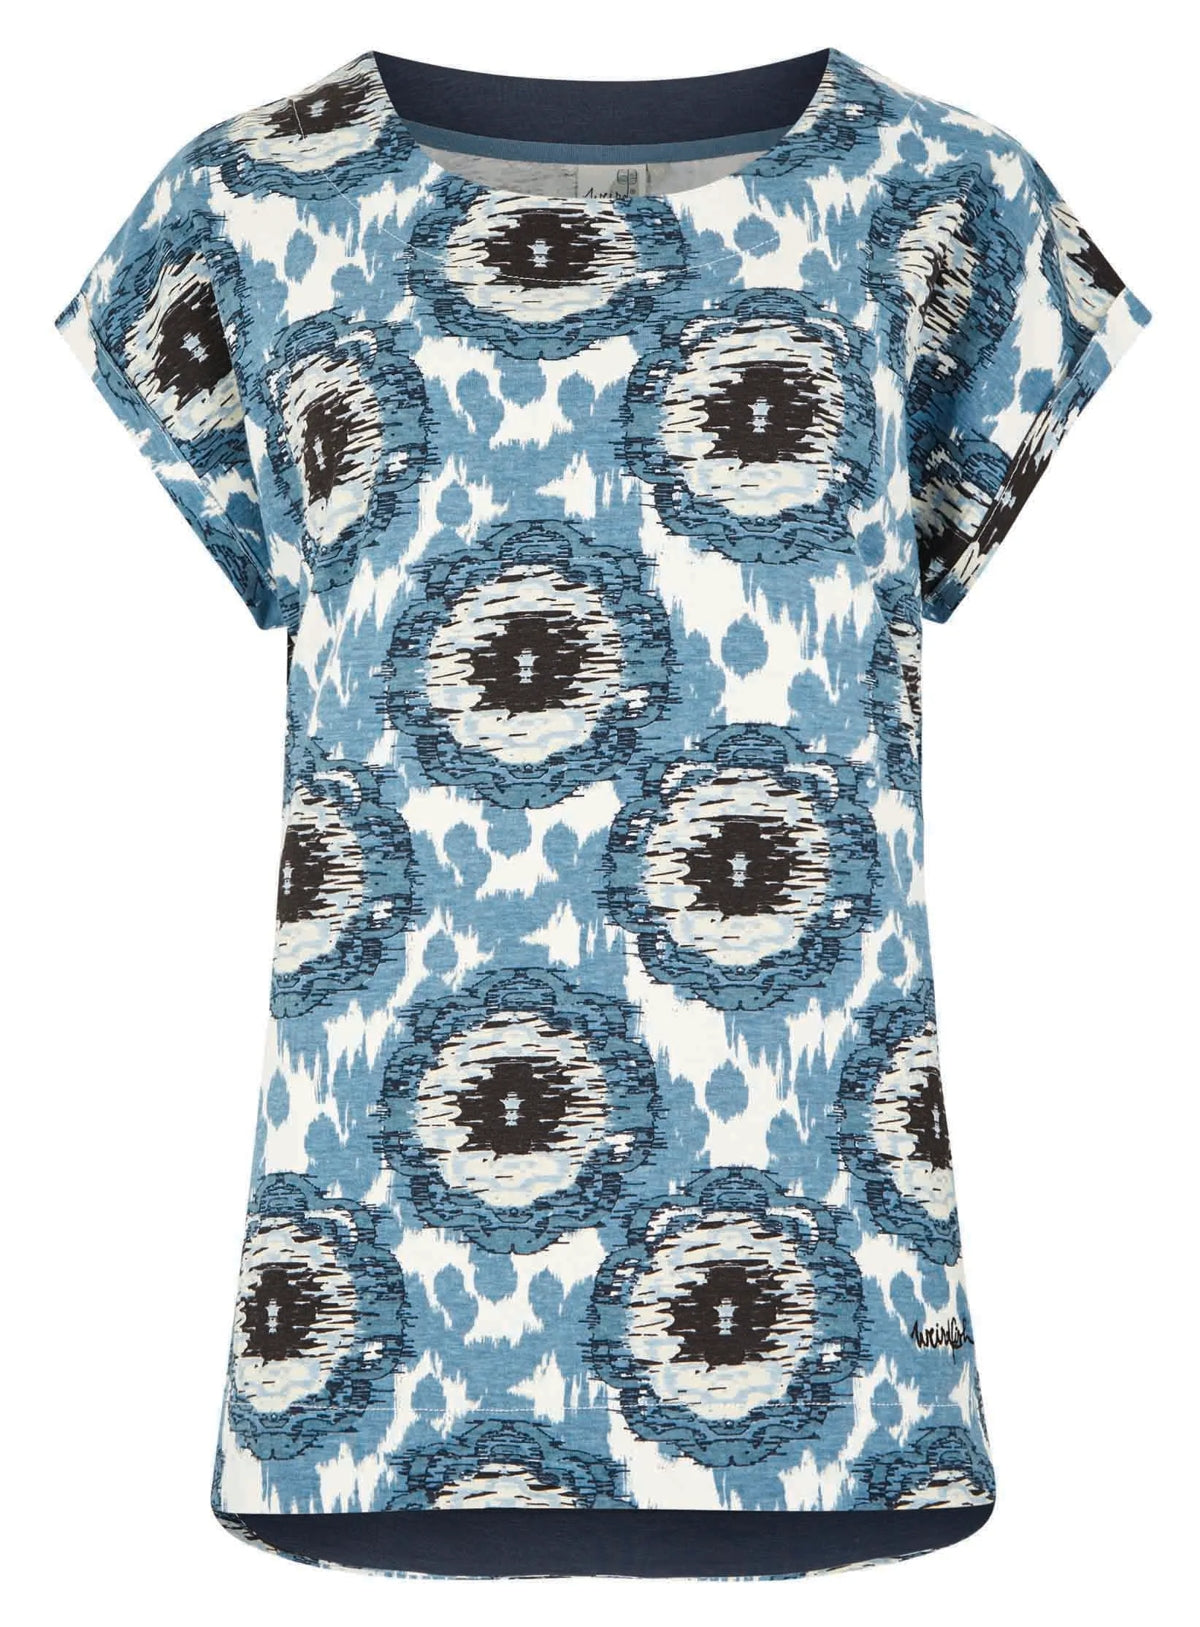 Weird Fish women's Paw Paw t-shirt with a Pale Denim Blue with an abstract circular style print.